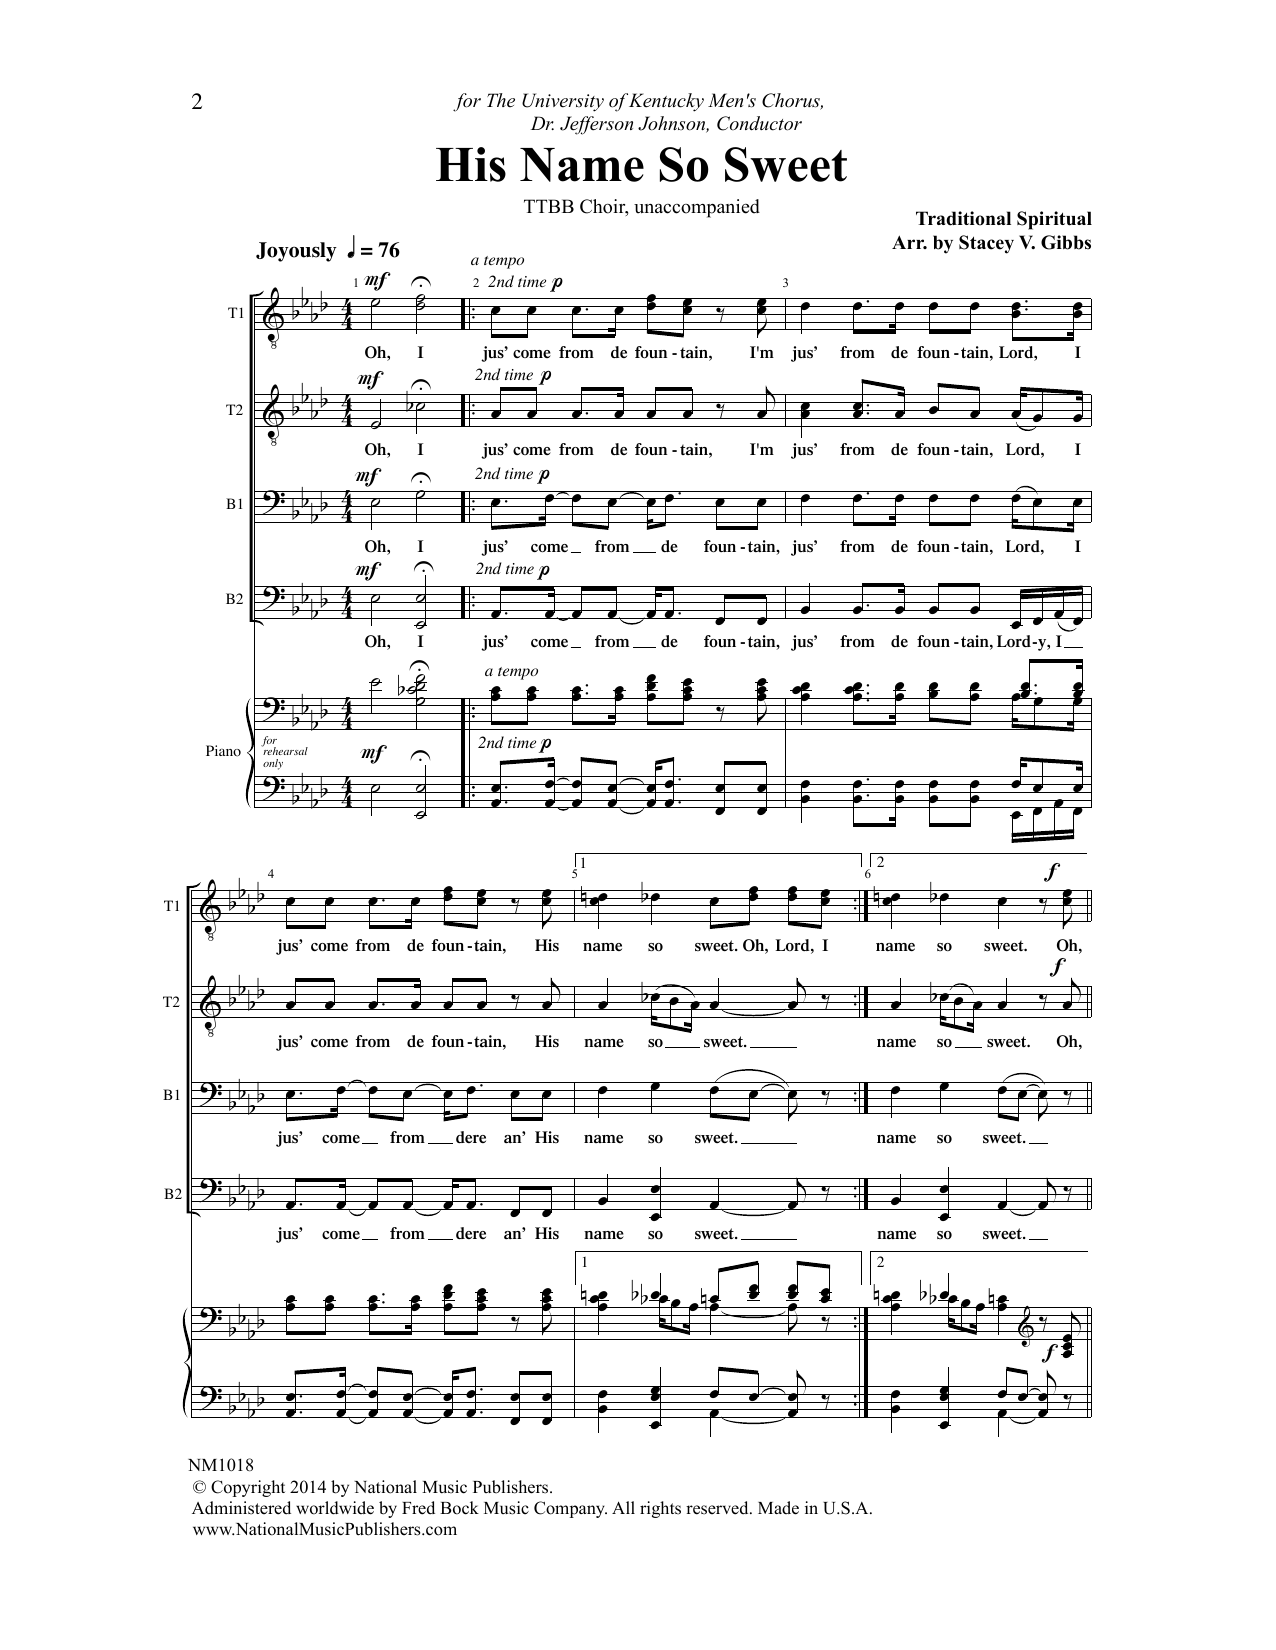 Download Stacey V. Gibbs His Name So Sweet Sheet Music